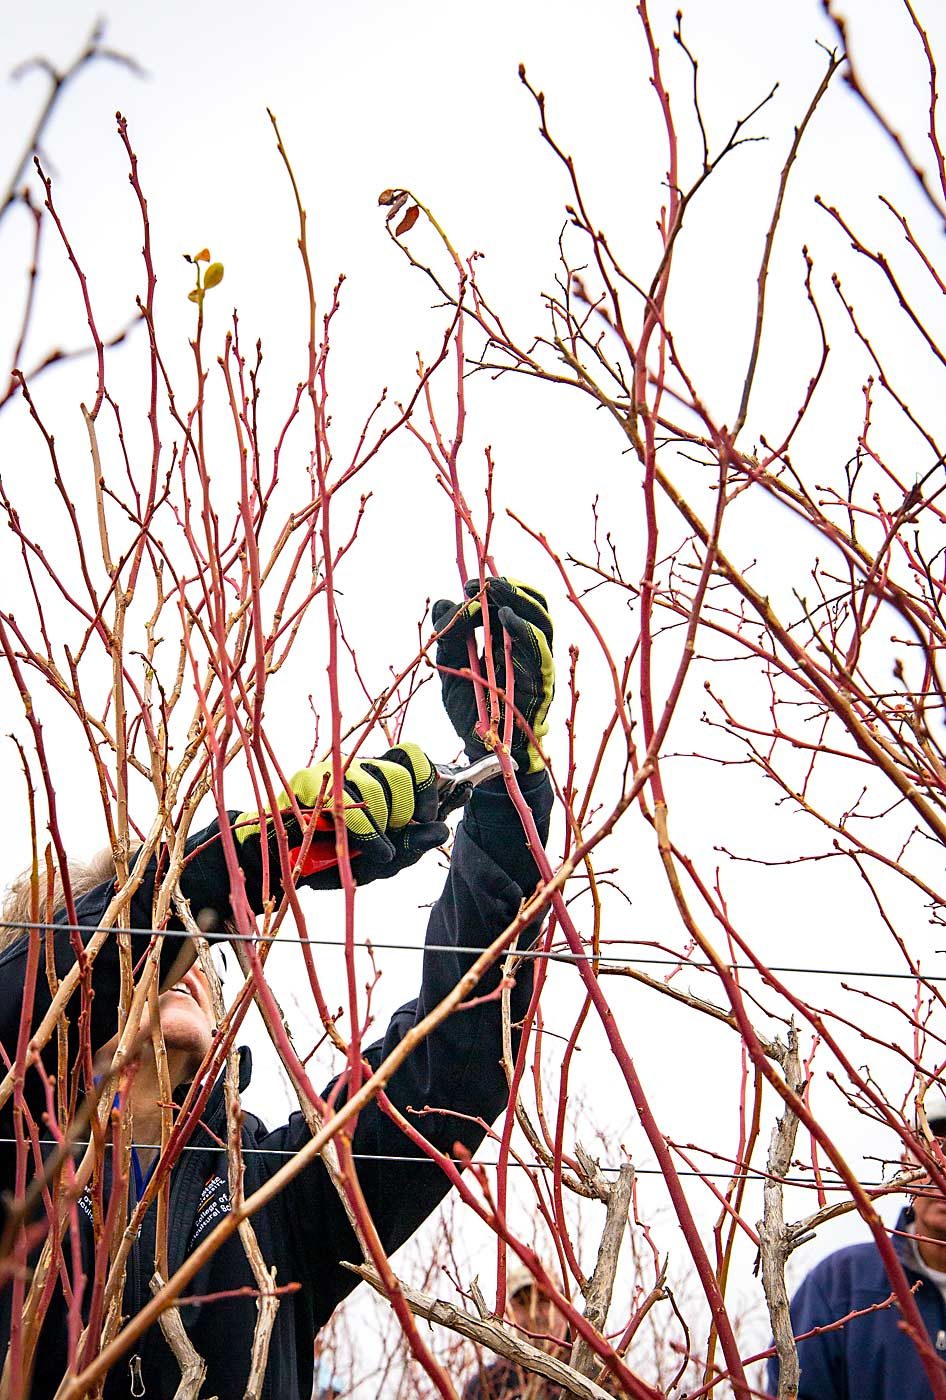 Bernadine Strik prunes in November at a workshop in a commercial field near Prosser, Washington. Strik is known for advising aggressive pruning each winter to ensure renewal growth of vigorous, 1-year-old wood to sustainably produce good berries. The grower of this block admitted he has underpruned in recent years, allowing the dense overgrowth of small, unproductive laterals. (Ross Courtney/Good Fruit Grower)